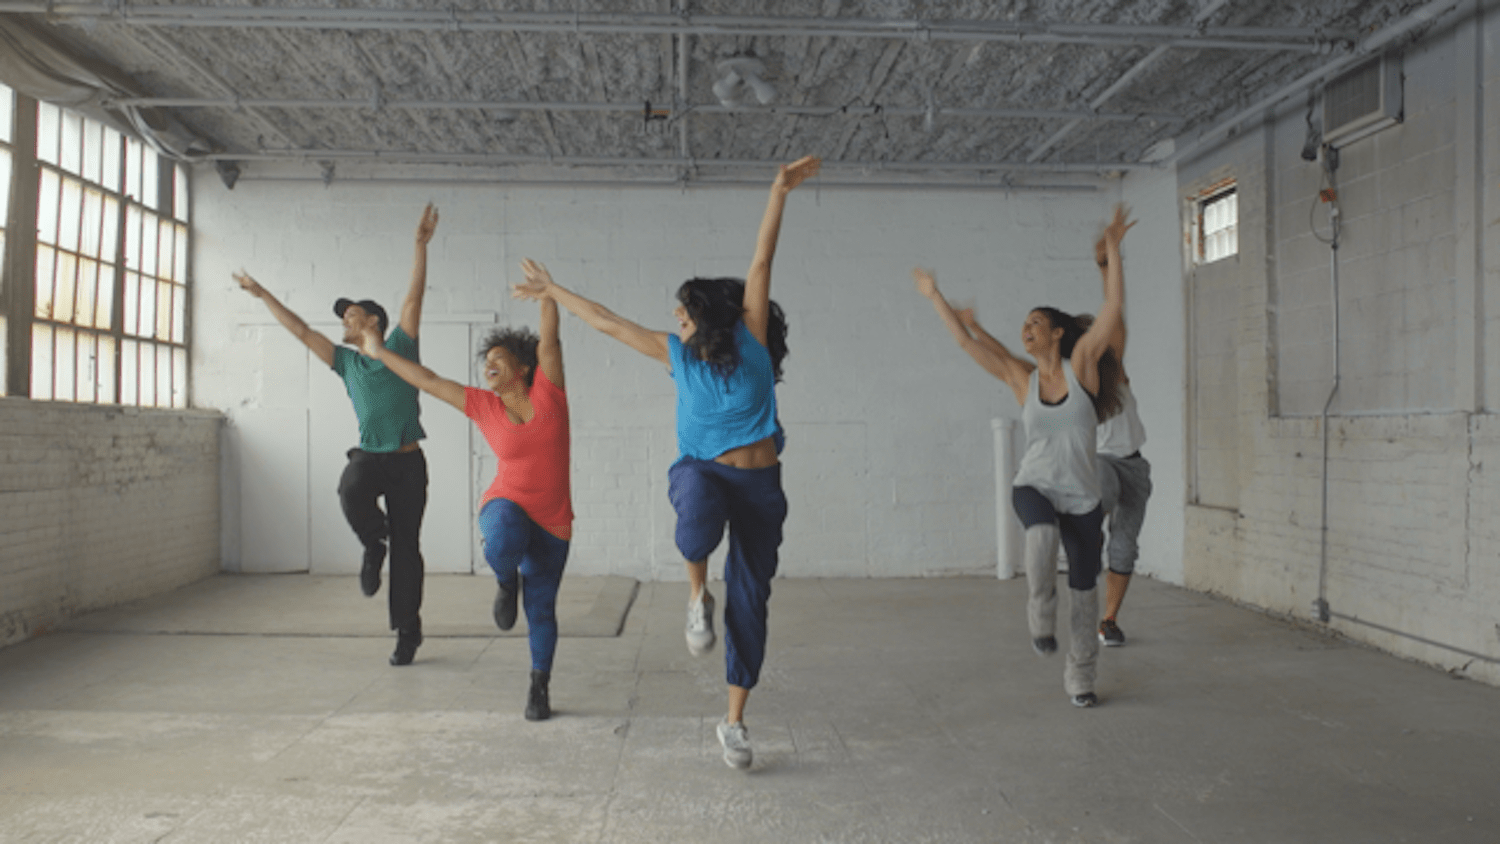 Garjana, a new fitness concept to raise money for Food Tank, is bringing together hundreds of New Yorkers for a one-hour completely immersive dance workout experience.